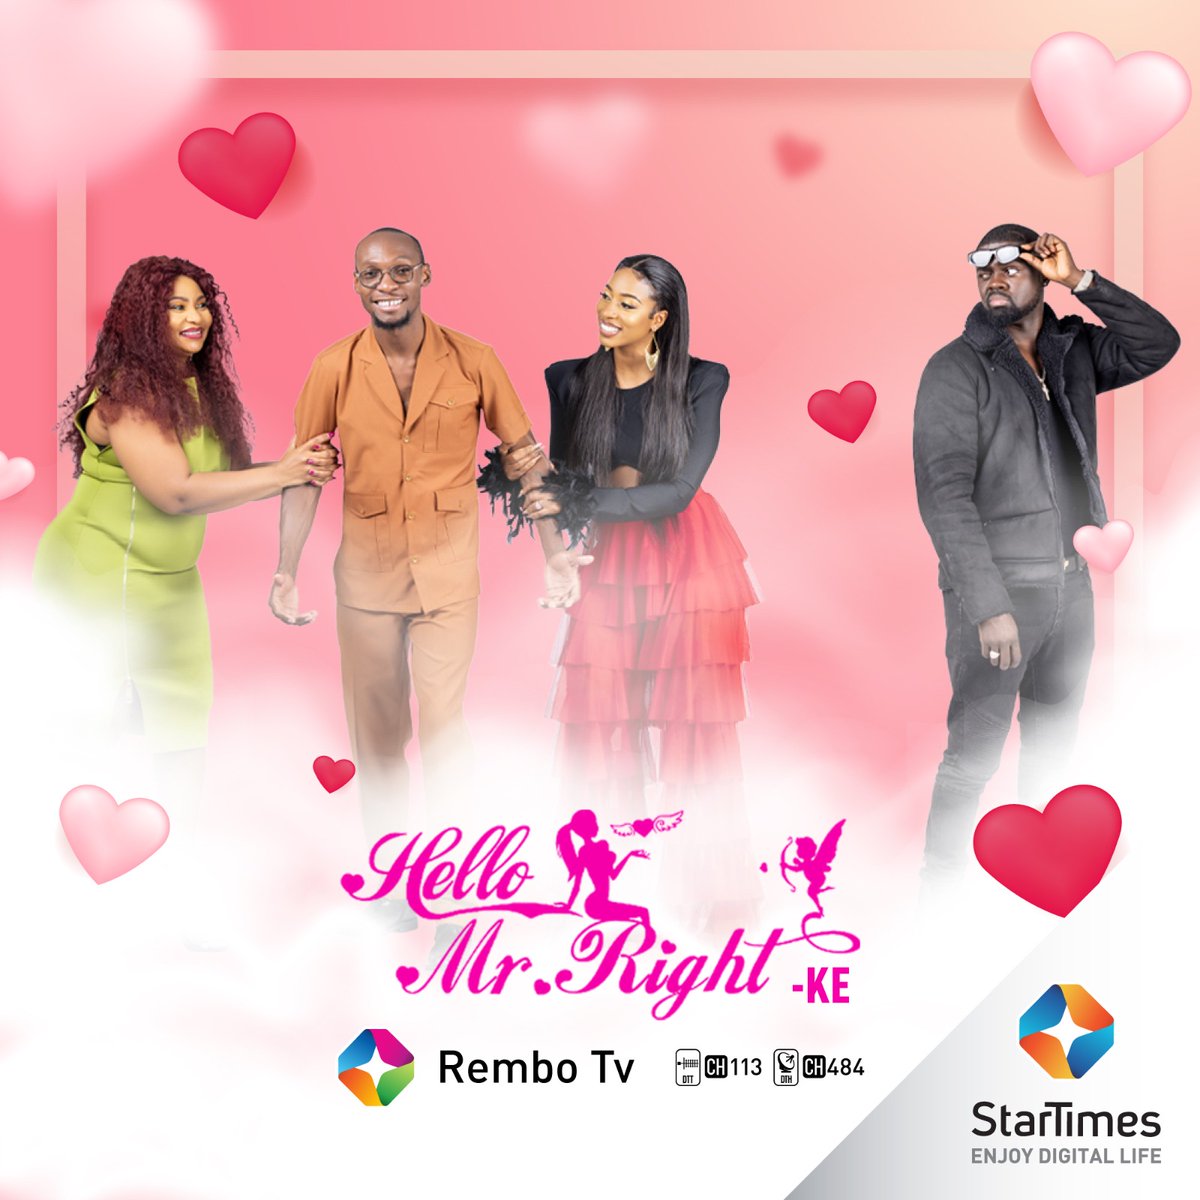 Dr. Ofweneke and Diana Bahati are turning the heat tonight on HelloMrRight. You don't want to miss out!

Tune in to @Strembotv and catch the most popular TV dating reality show. 
@StarTimesKenya, @DrOfweneke, @Diana_Bahati, @getrudemungai
#AllUnderOneRoof
#ZipateStarTimes